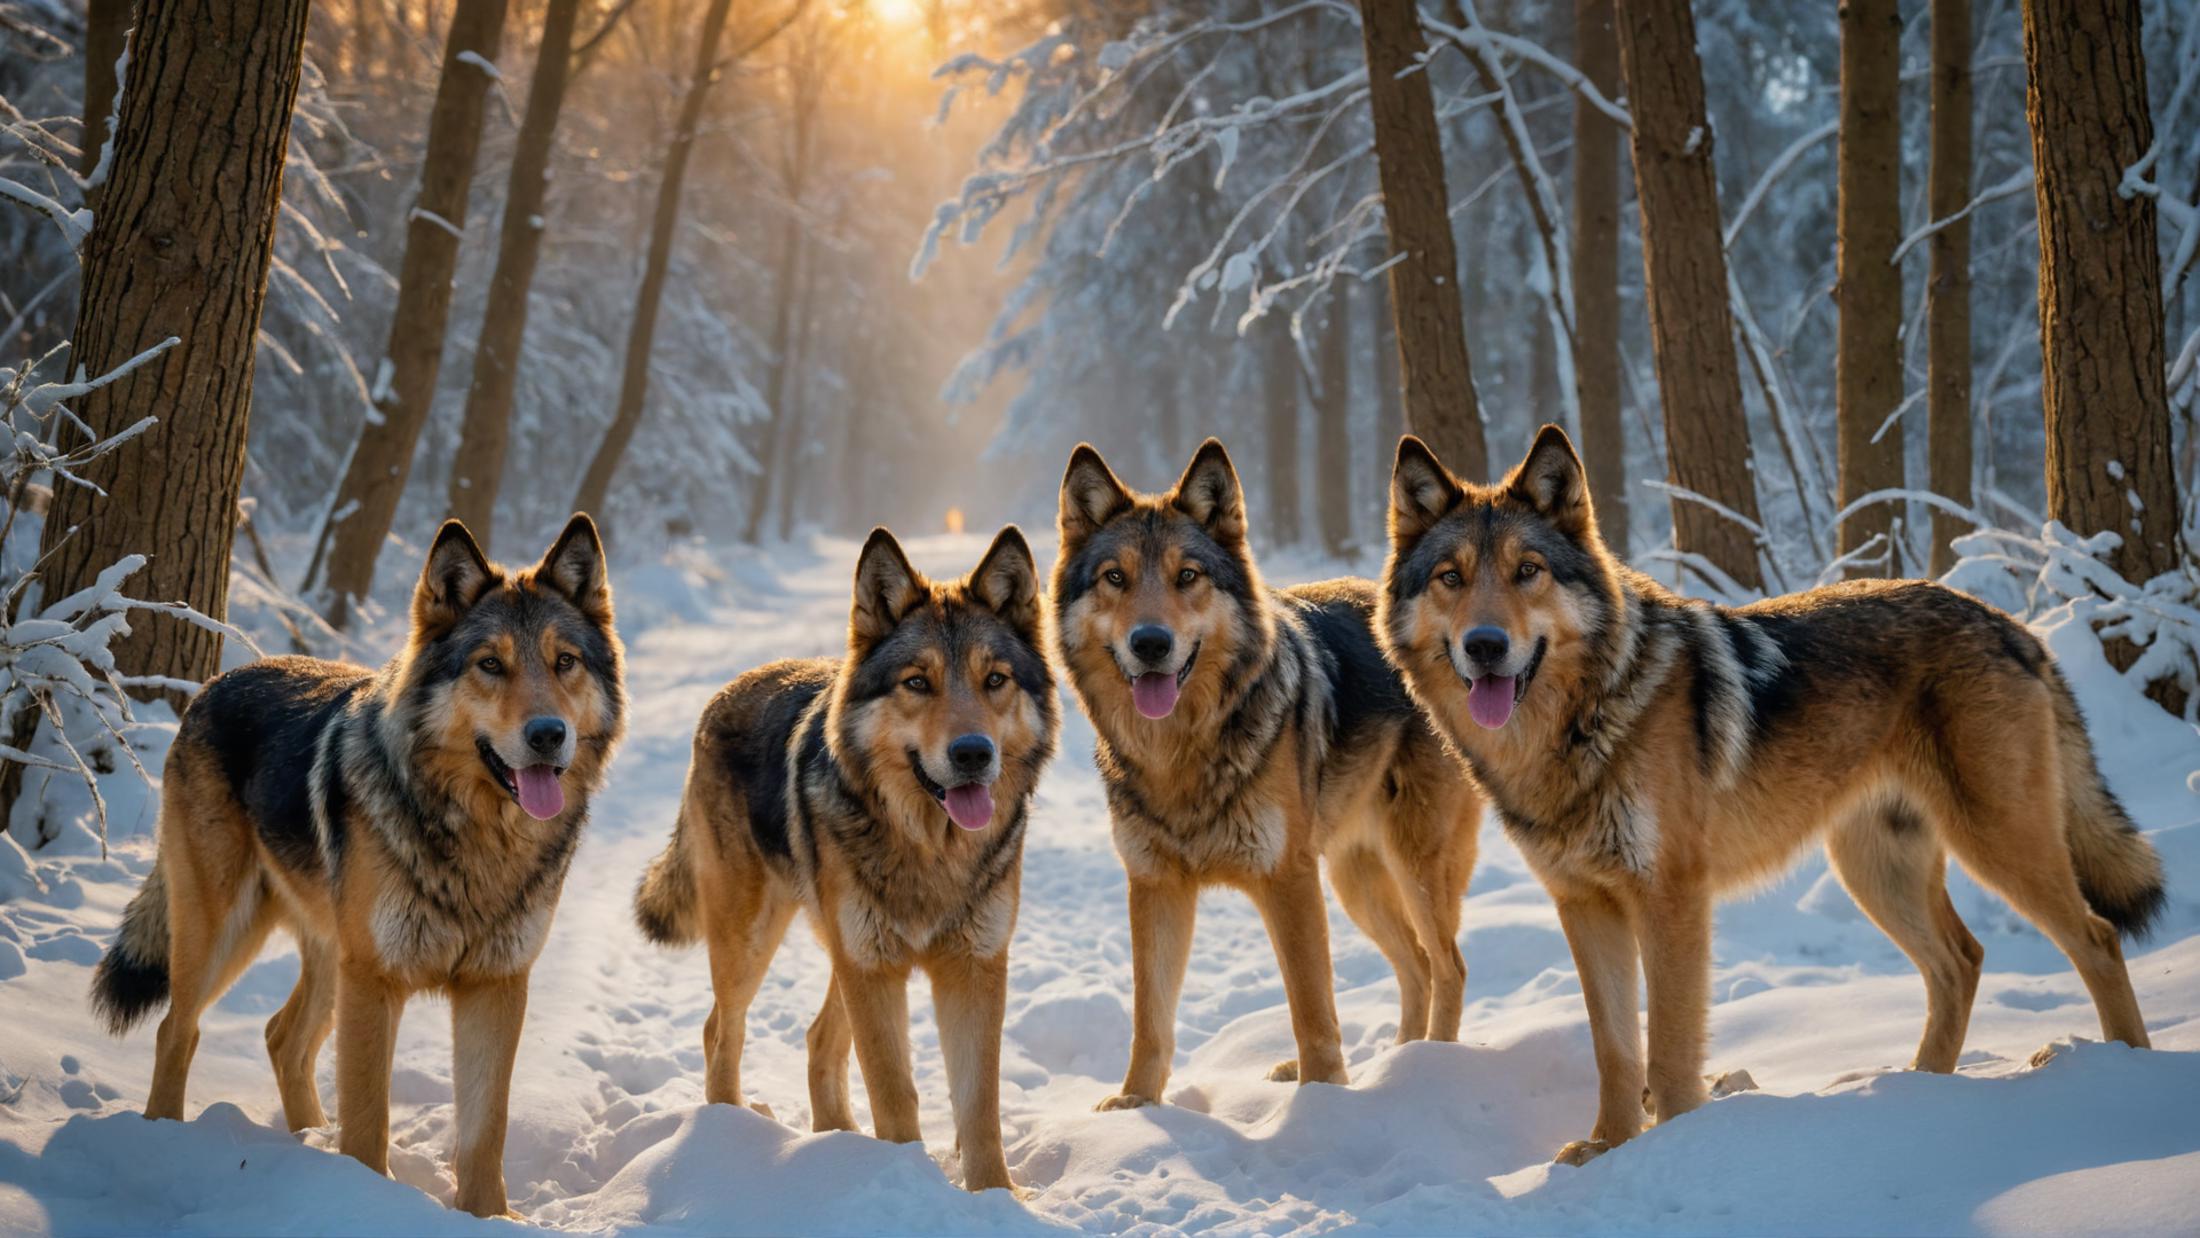 A Pack of Wolves Standing Together in the Snow